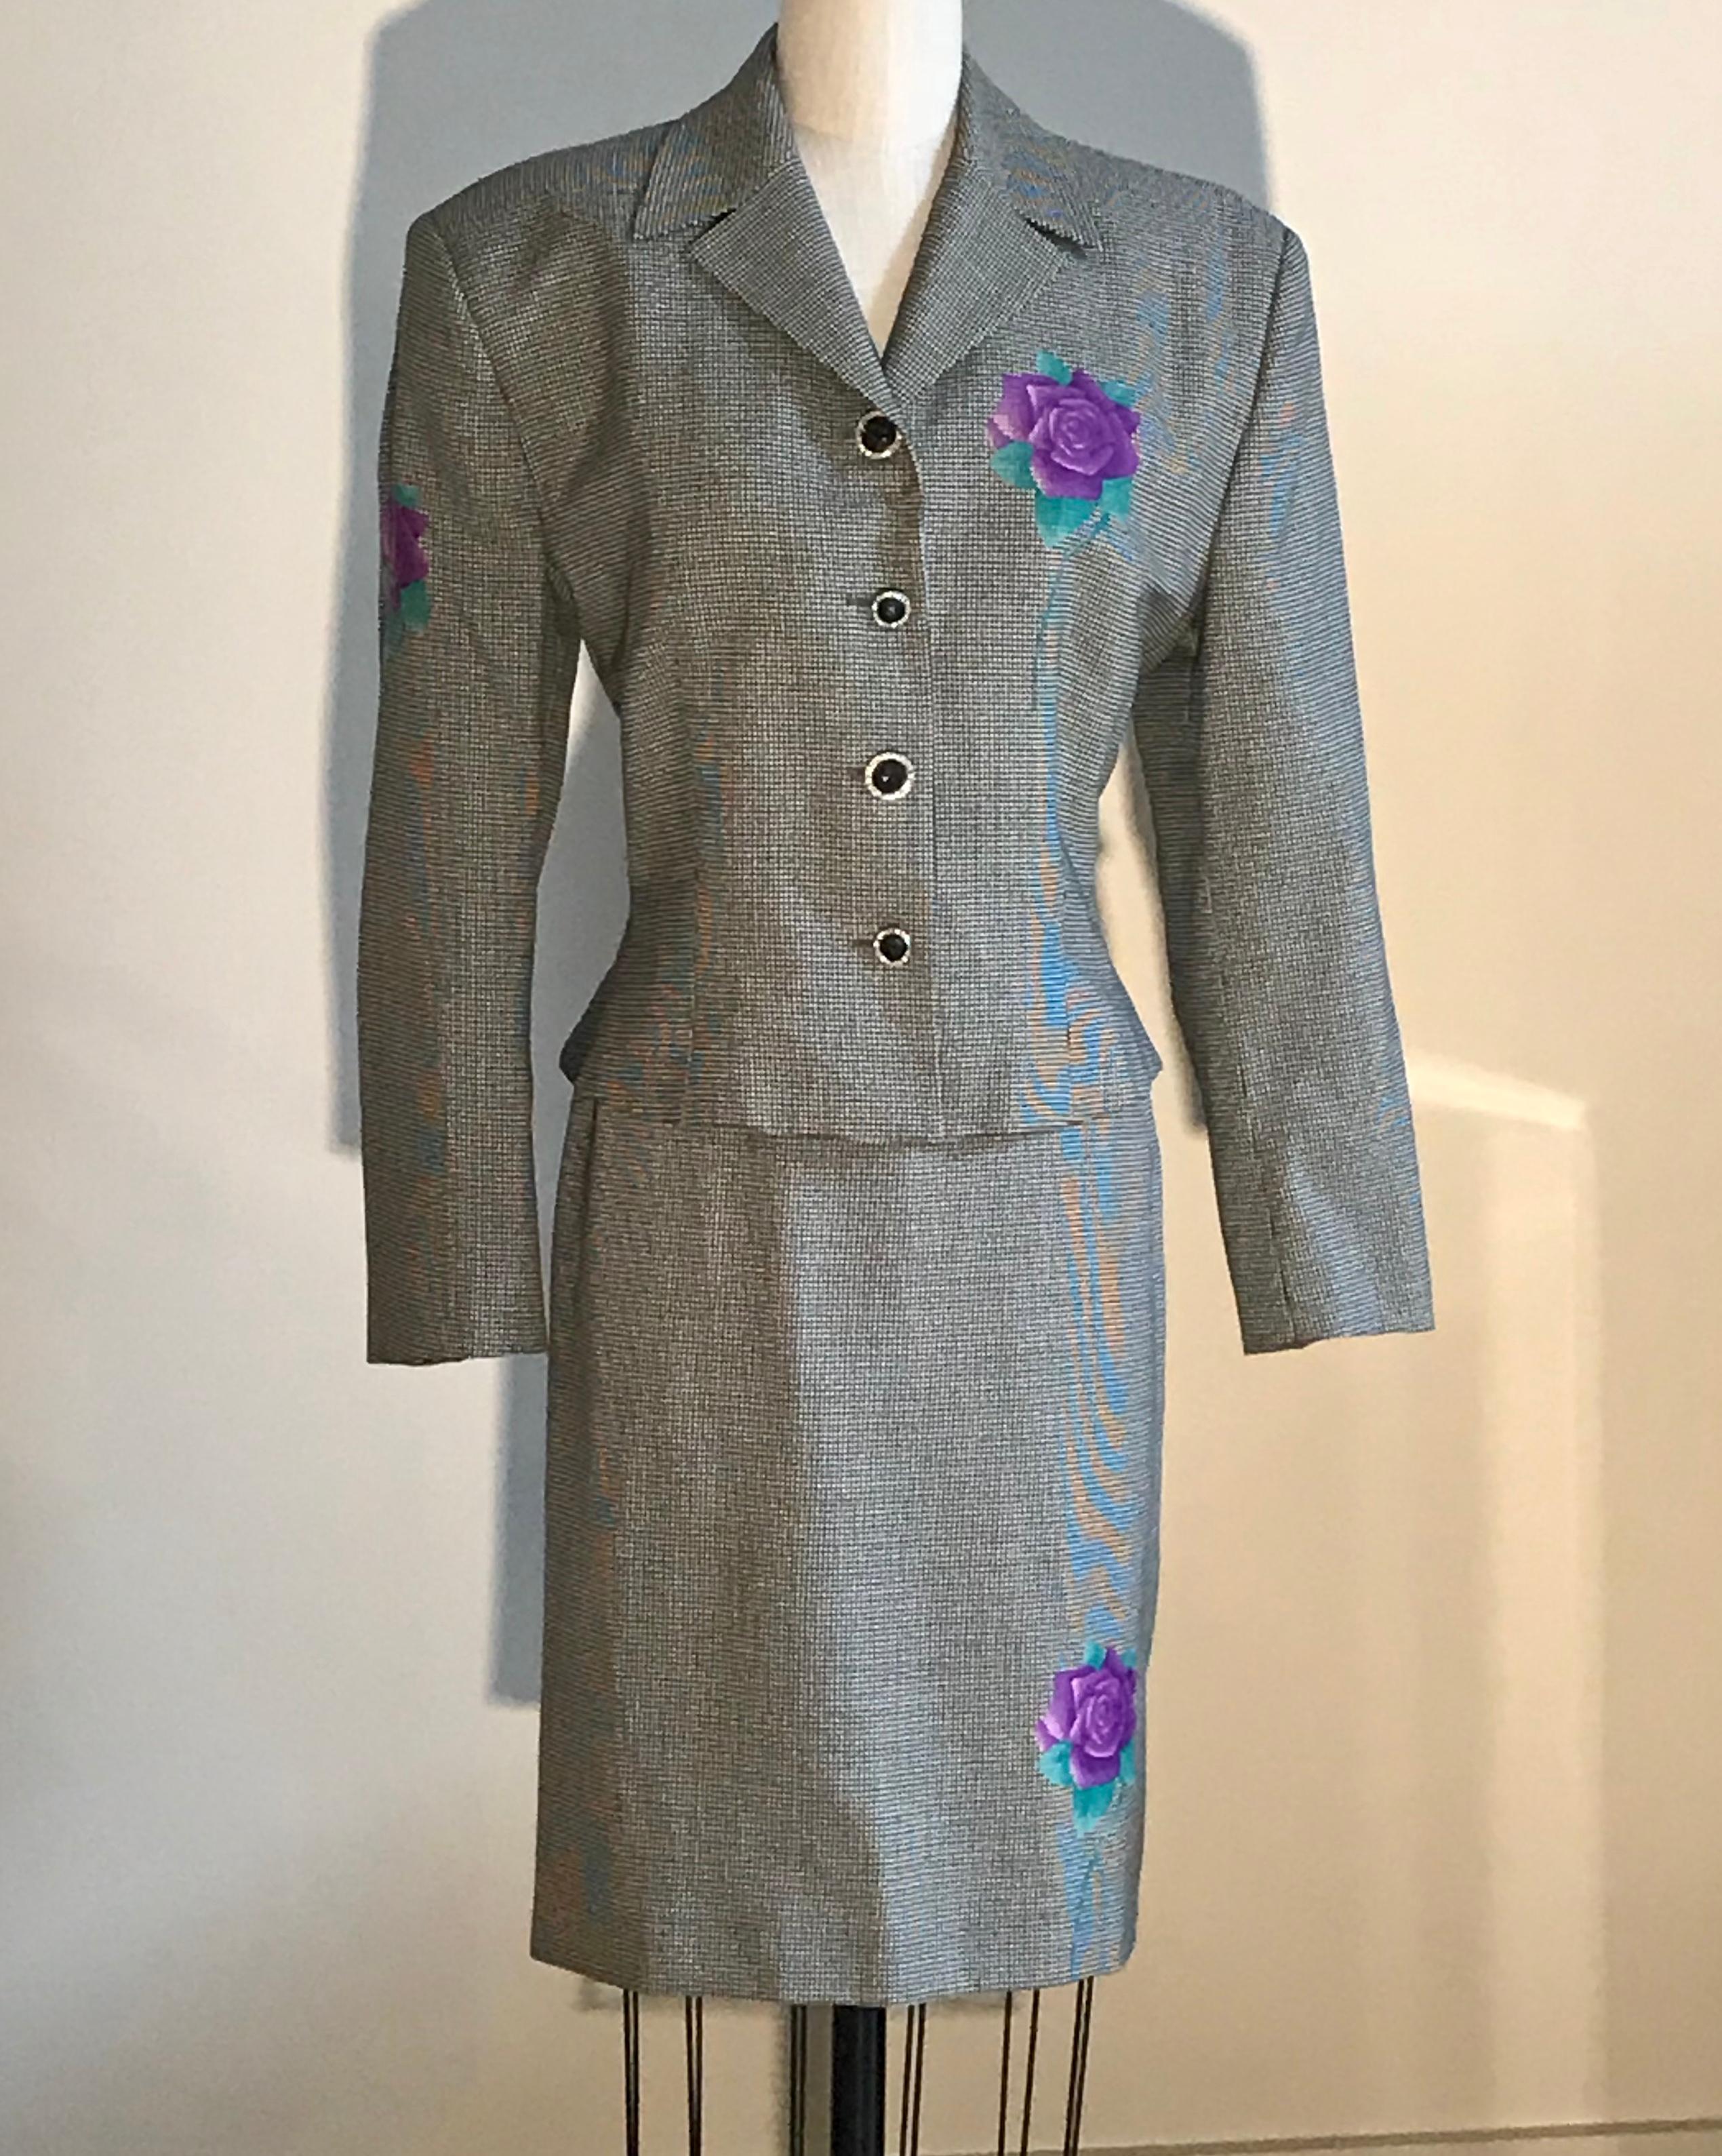 Gianni Versace vintage wool skirt suit in black and white houndstooth or dogtooth check. Purple and green roses printed at jacket bust, one sleeve, and back, as well as on front and back skirt. Jacket features purple Versace logo buttons with